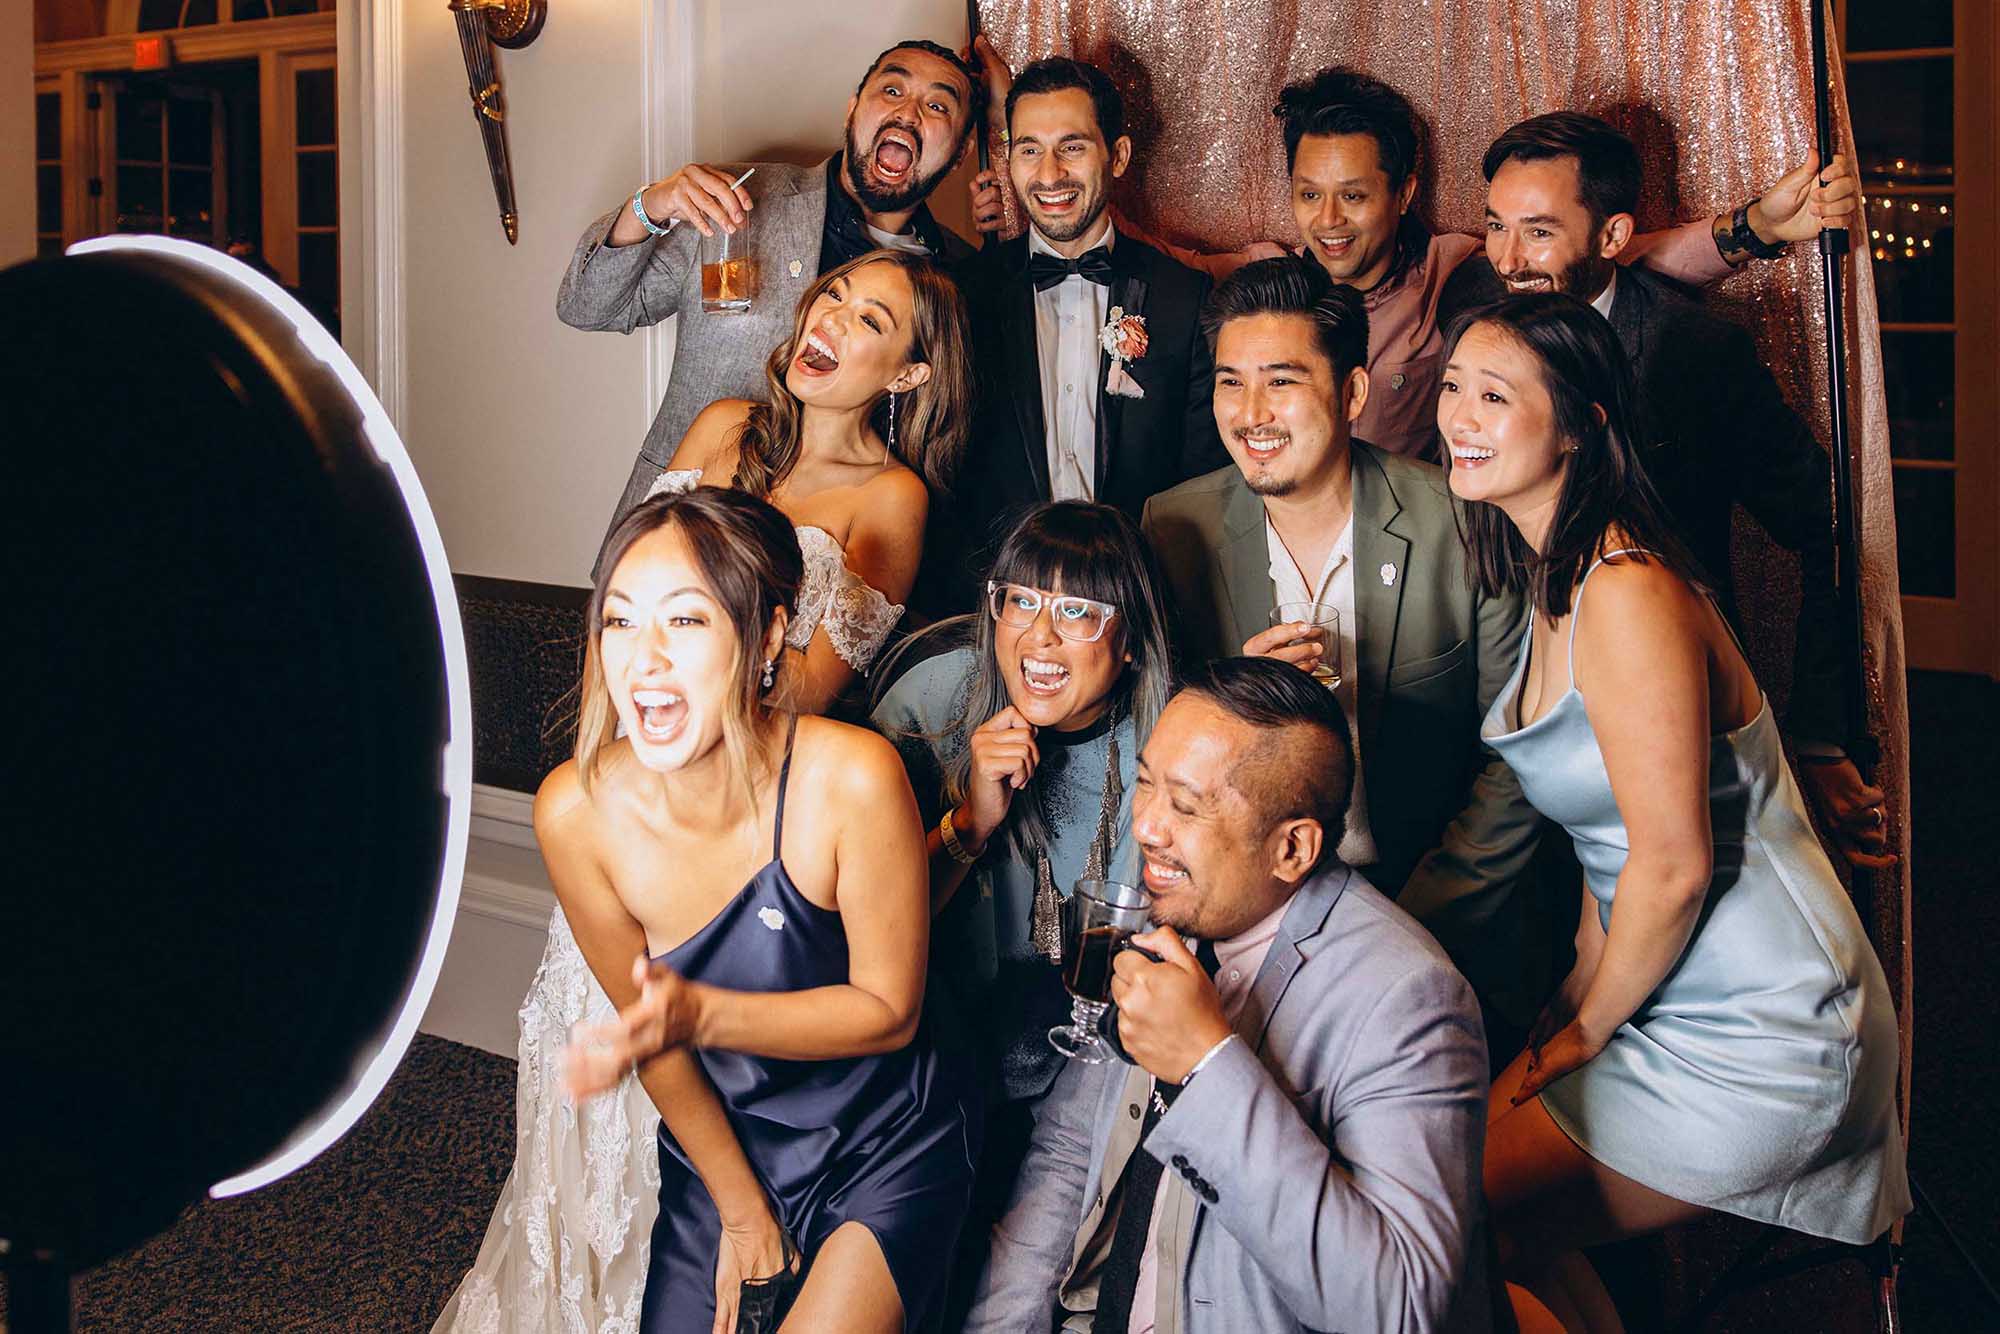 Wedding guests having fun with photo booth